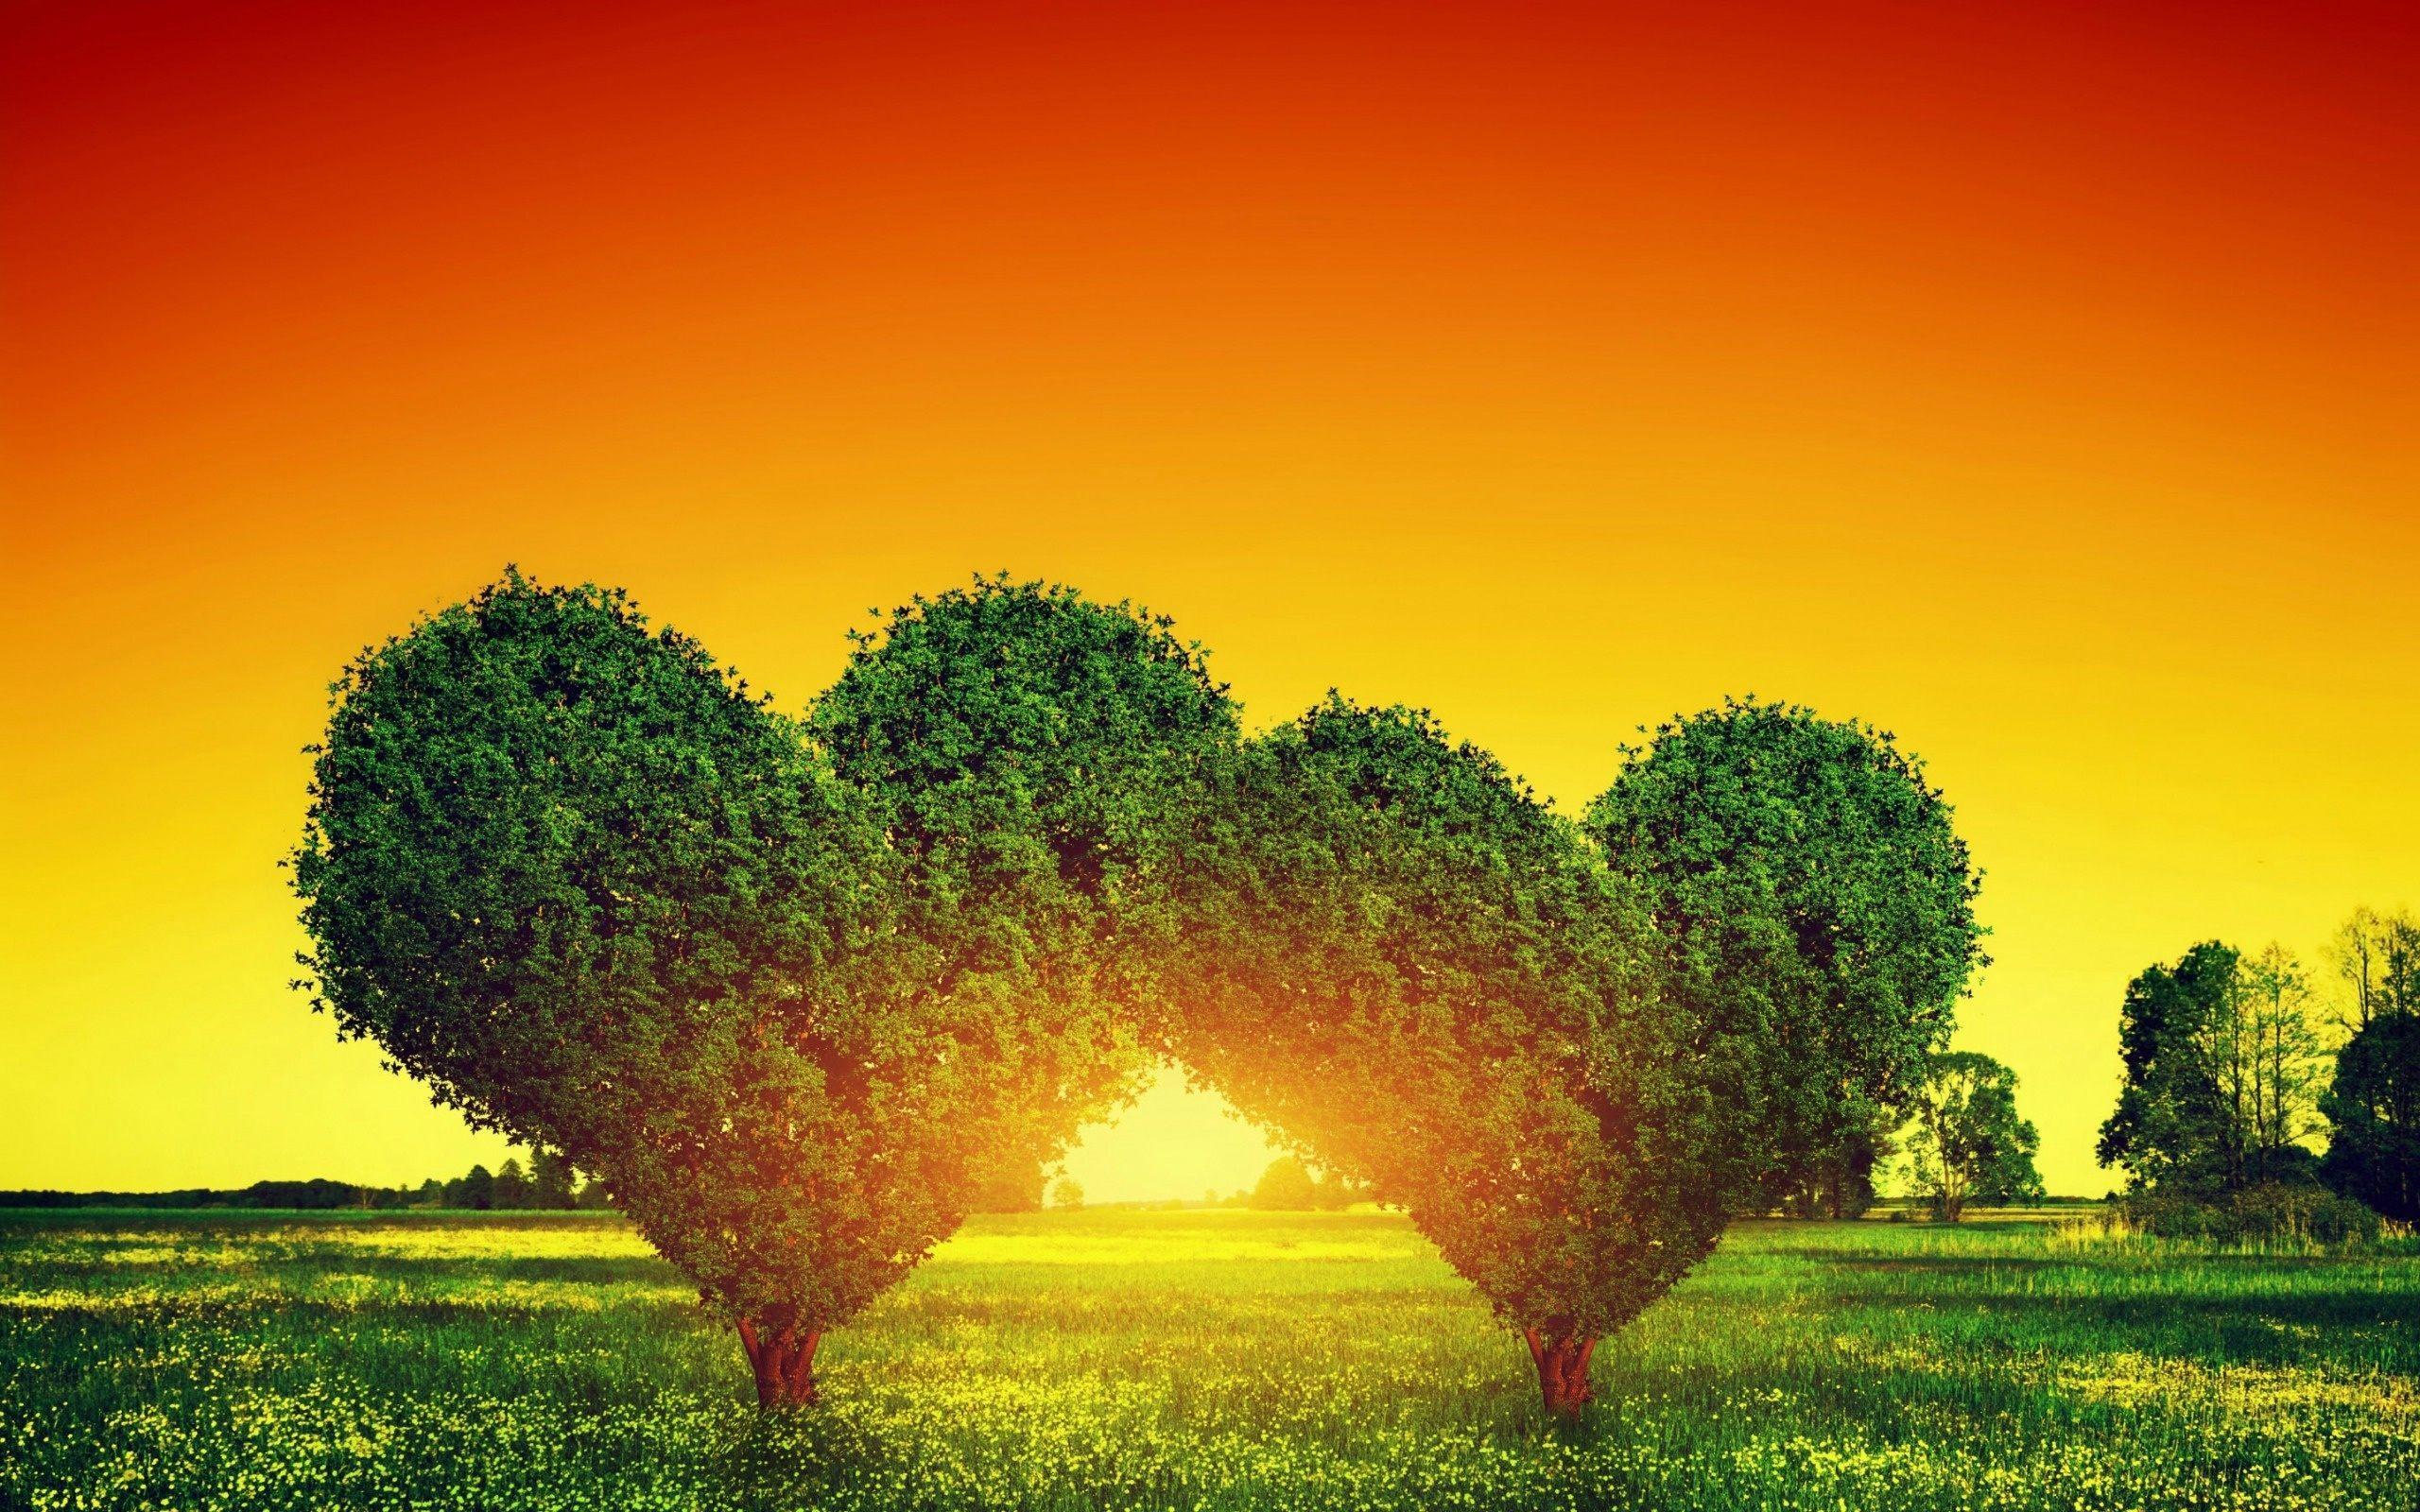 Heart Tree Live Wallpaper for Android - APK Download